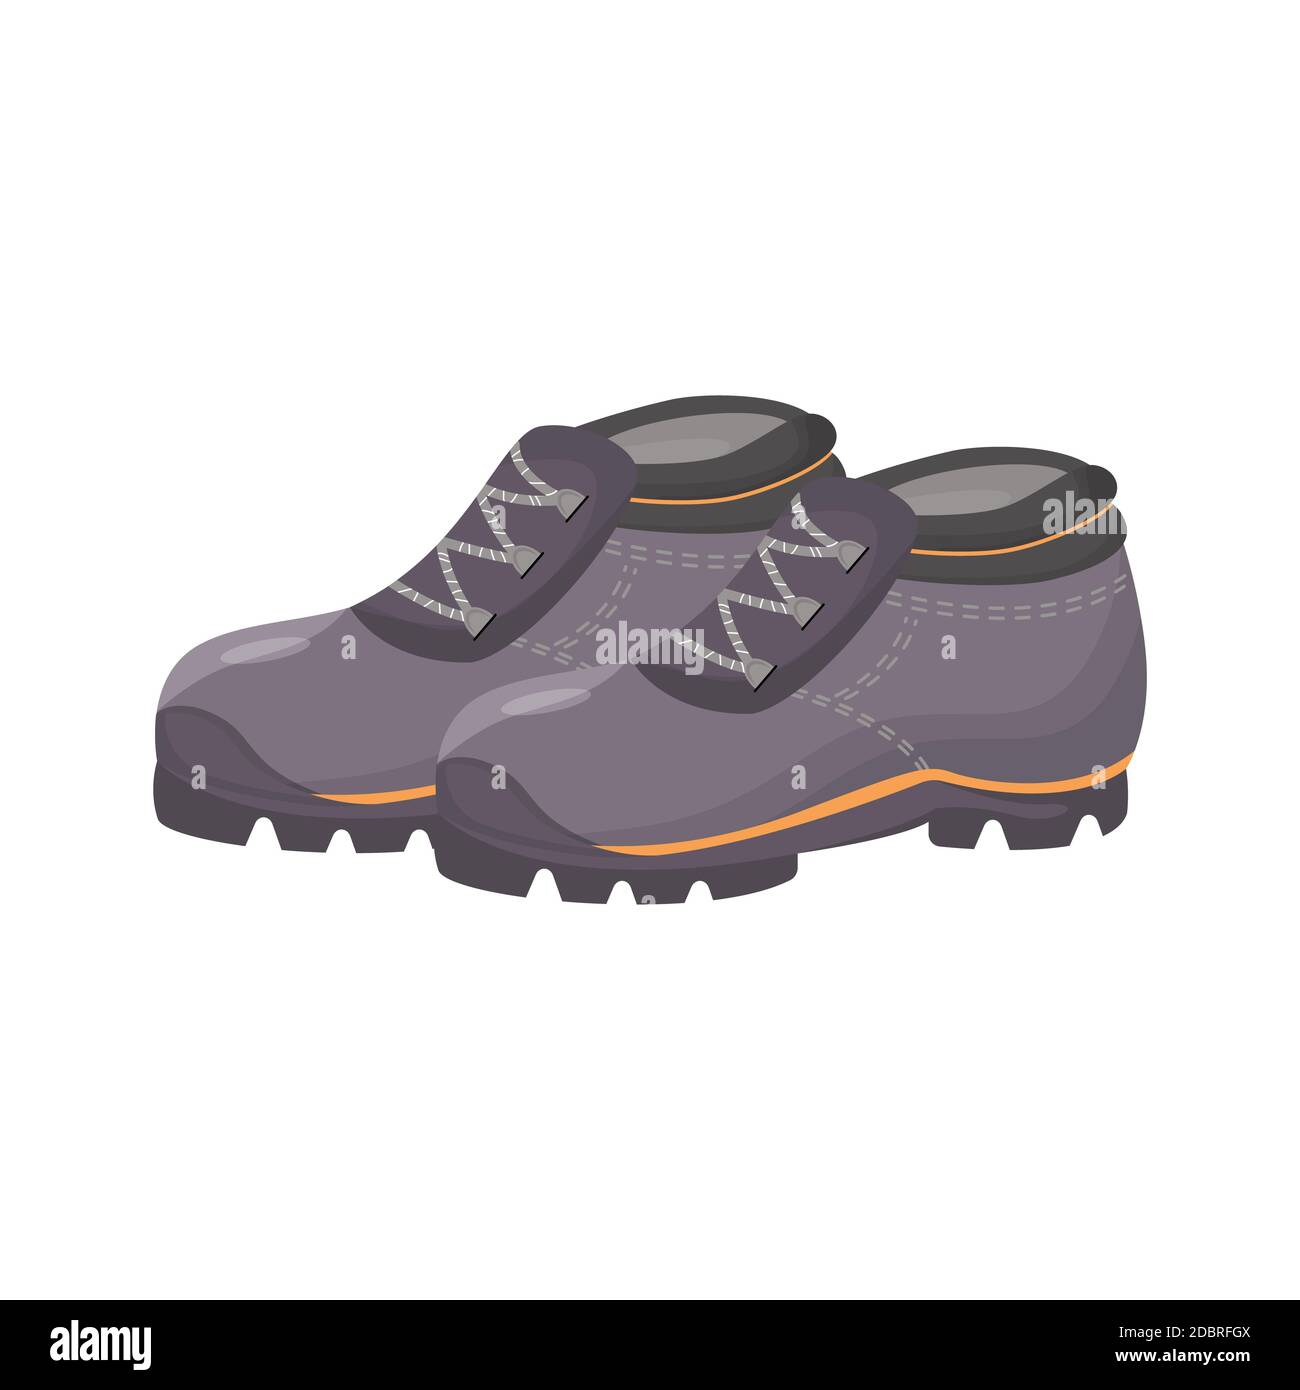 Rubber shoes, galoshes cartoon vector illustration. Personal protective  equipment, gardening and industrial waterproof boots. Seasonal footwear.  Gray Stock Photo - Alamy